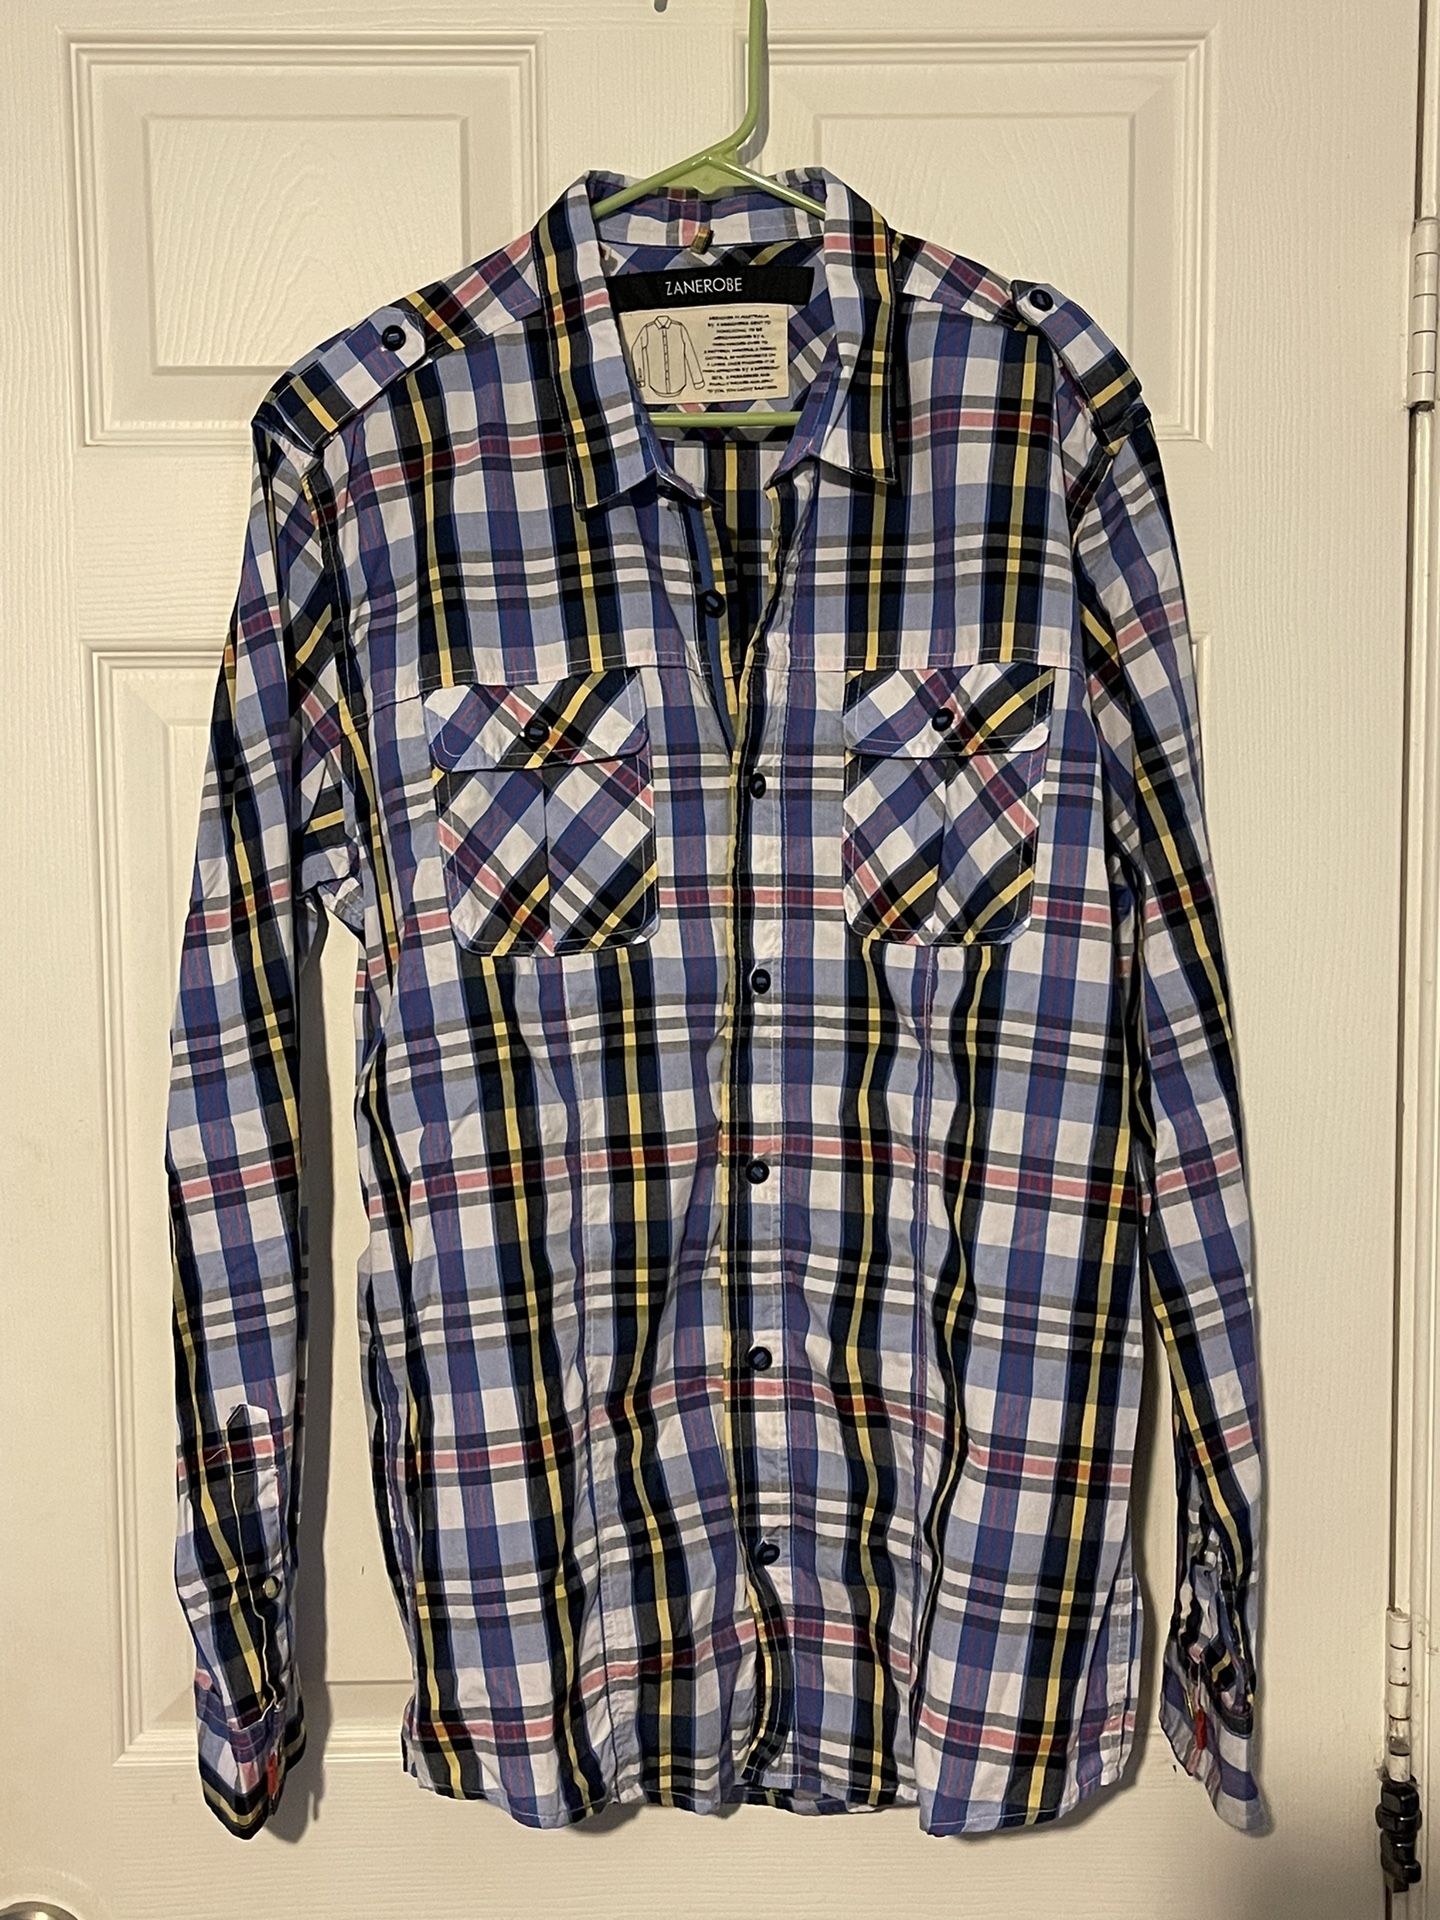 Zanerobe Long Sleeve Button Up Plaid Multicolored Mens XL 